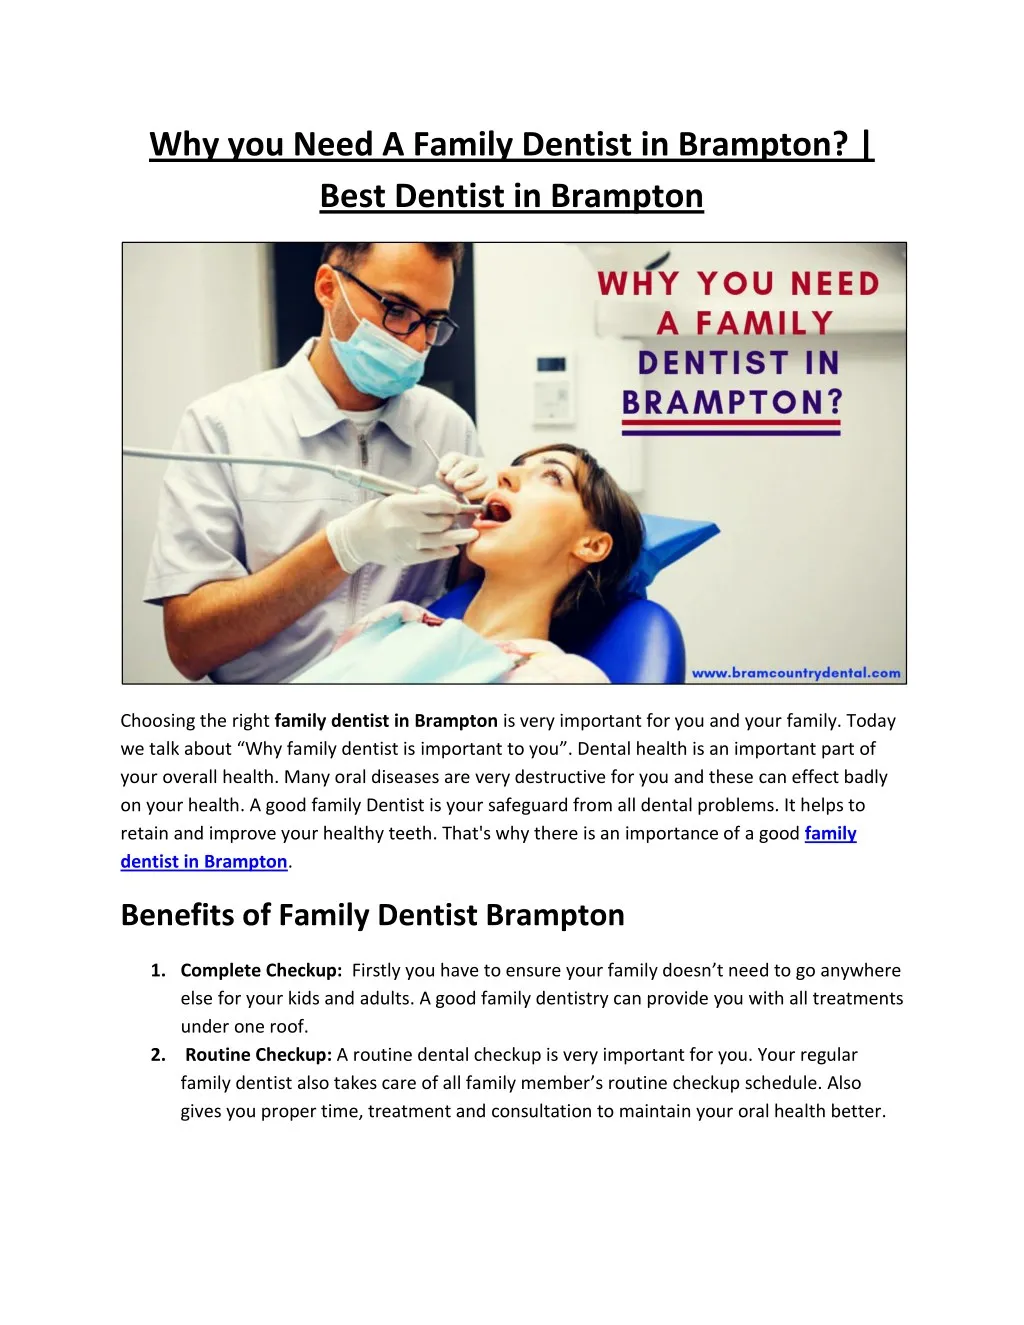 why you need a family dentist in brampton best